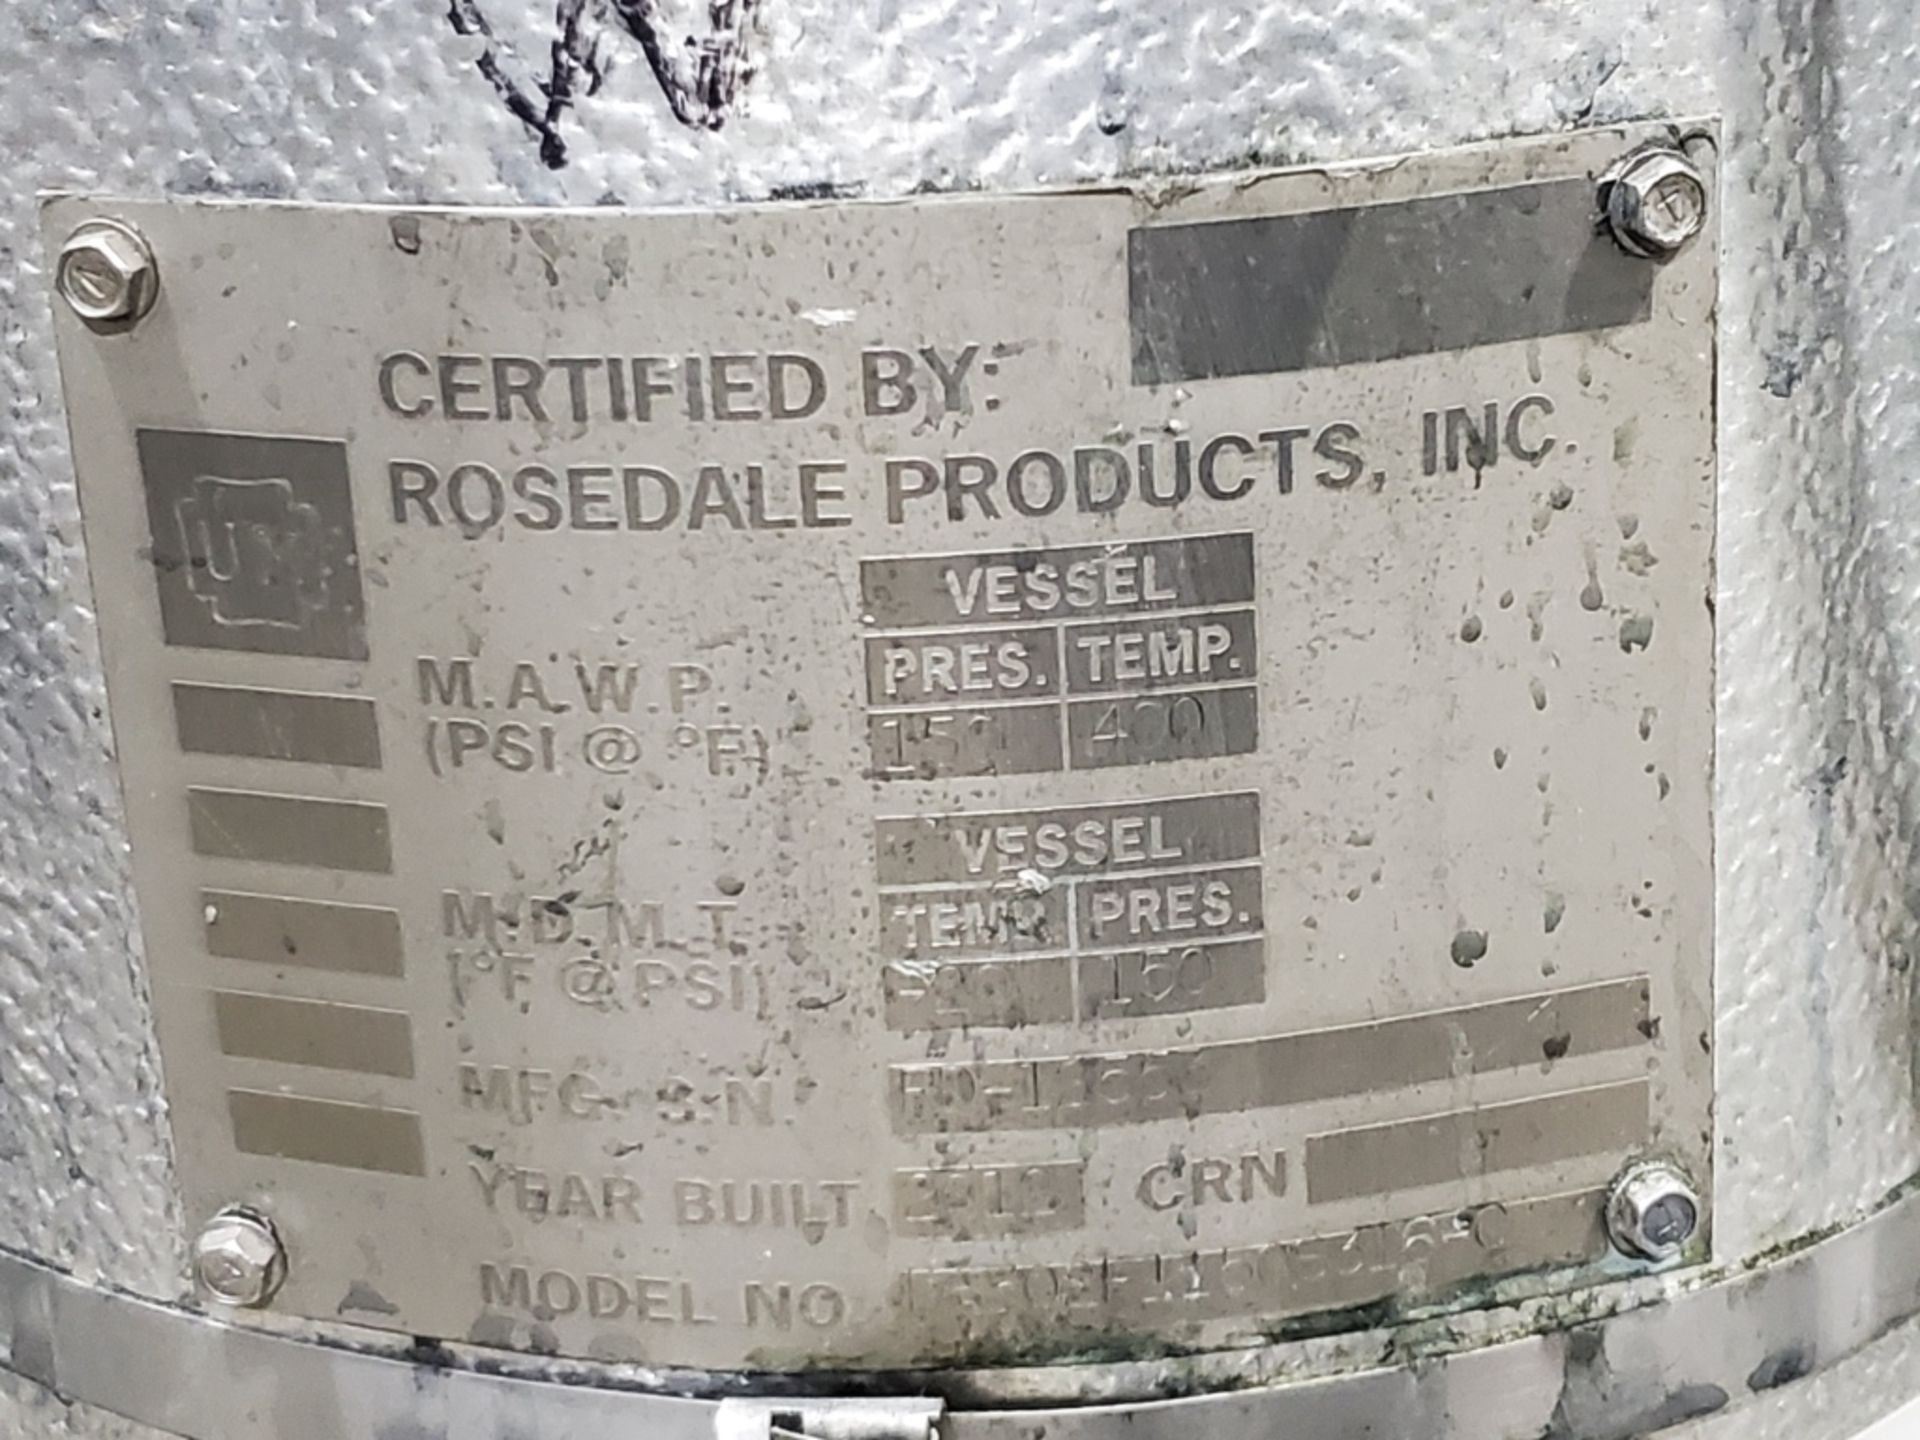 Rosedale Products 3.0 Sq Ft Surface Area Filter - Image 3 of 4